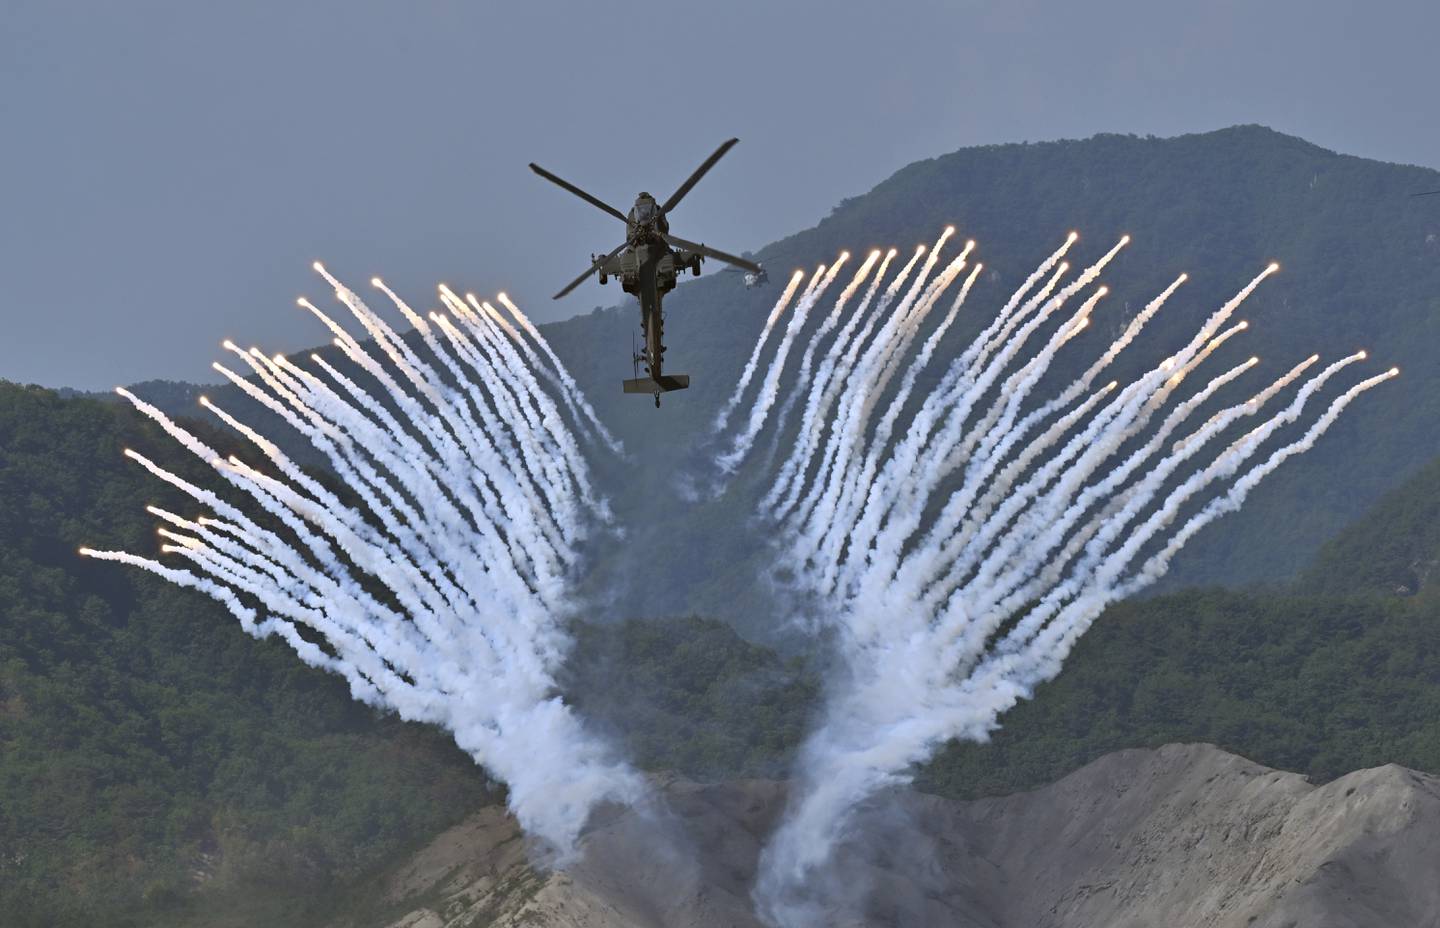 South Korea's Apache AH-64 helicopter fires flares during a South Korea-U.S. joint military drill at Seungjin Fire Training Field in Pocheon, South Korea Thursday, June 15, 2023.